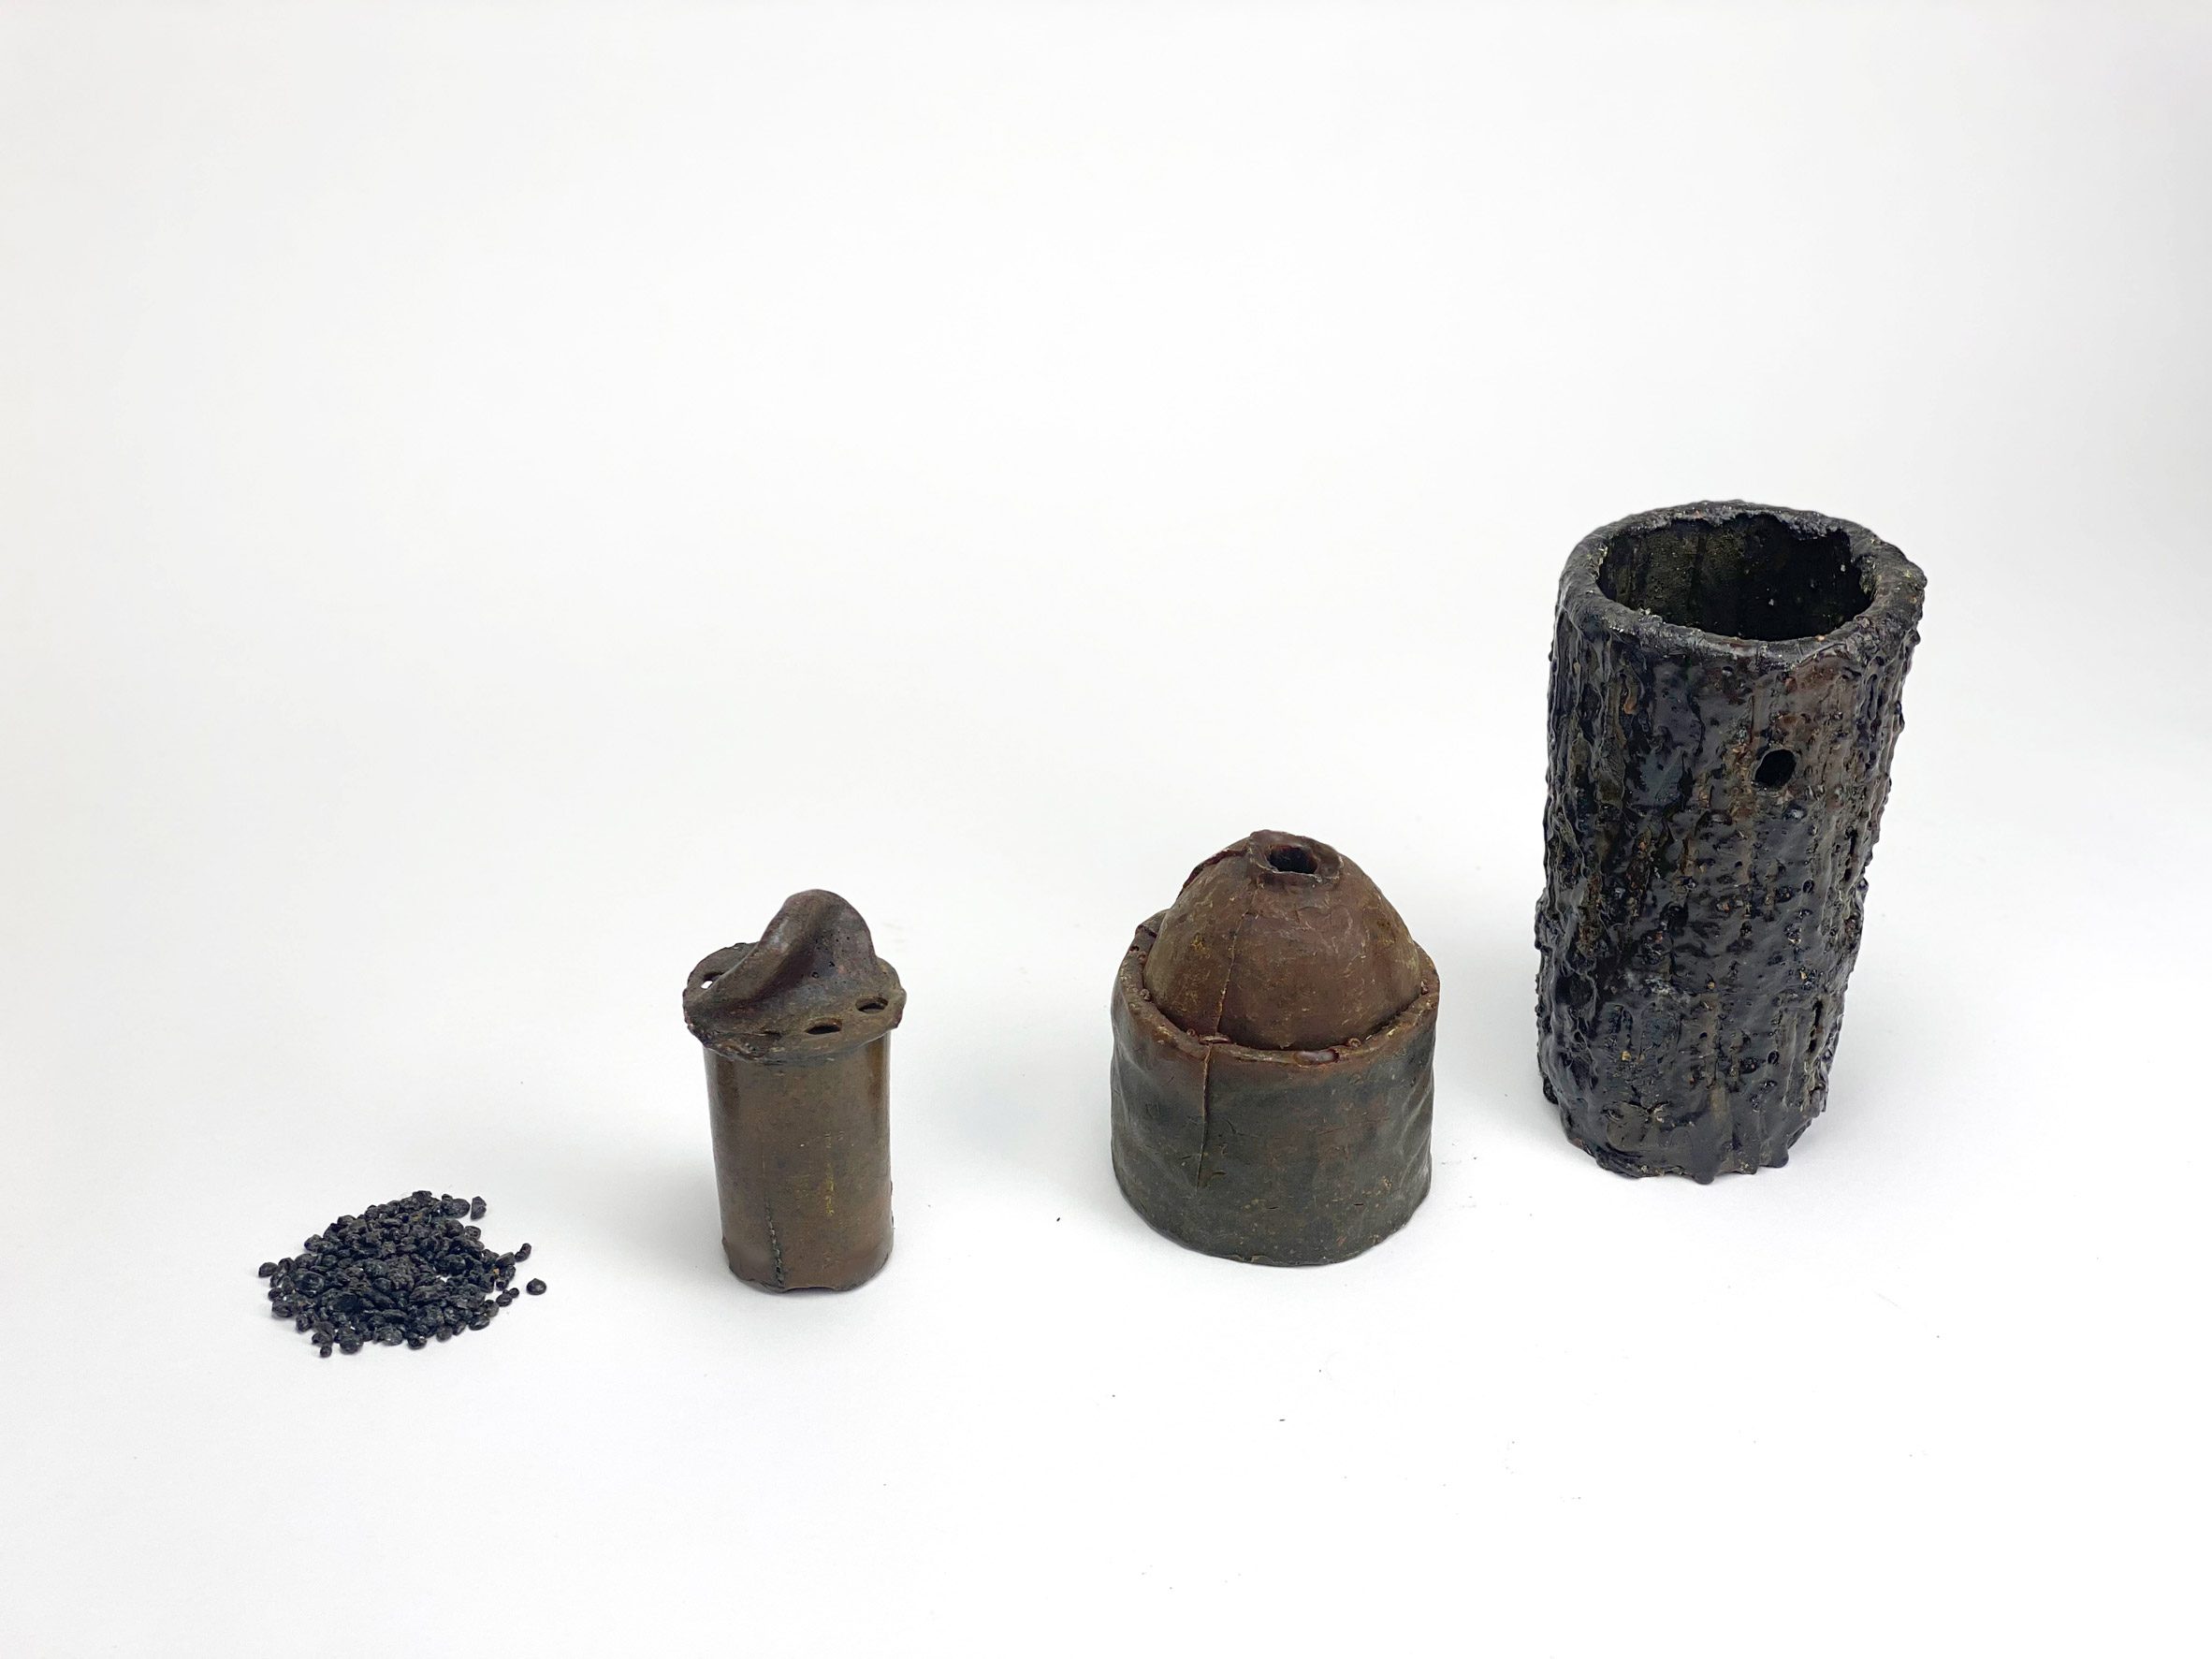 Carafe, pellets and cartridge for water filtering by Charlotte Böhning and Mary Lempres